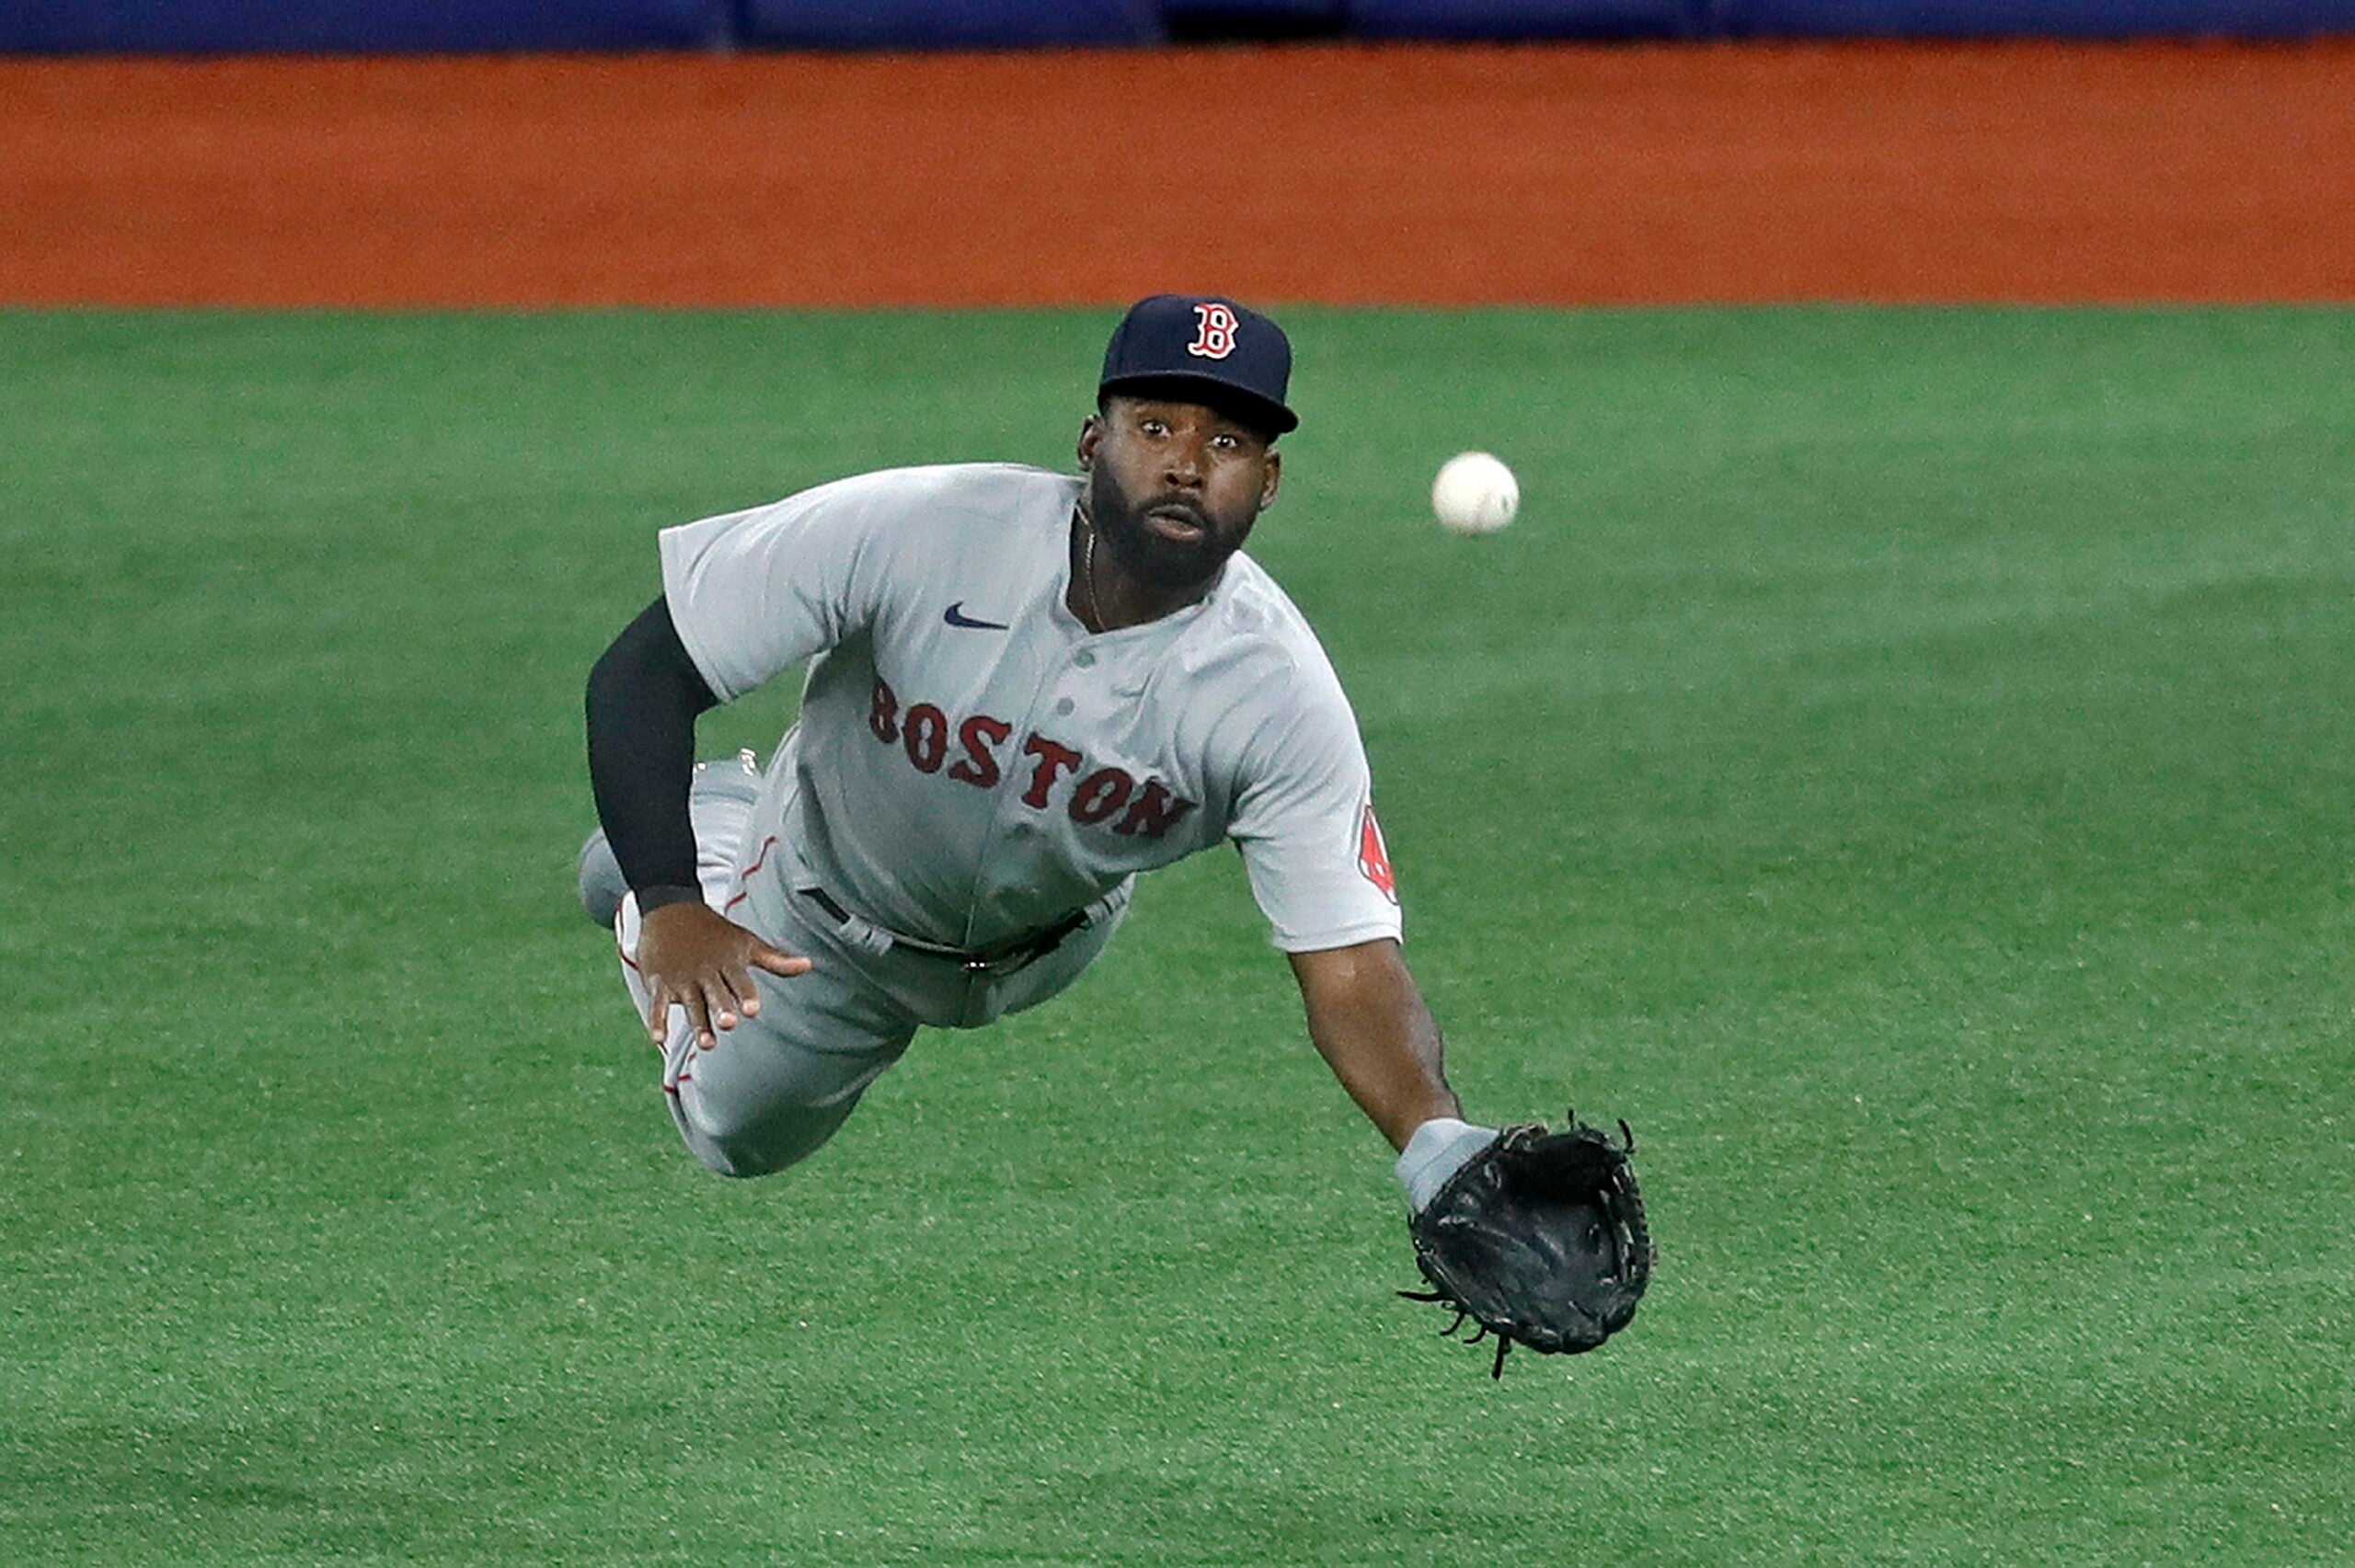 What experts are saying about the Red Sox re-acquiring Jackie